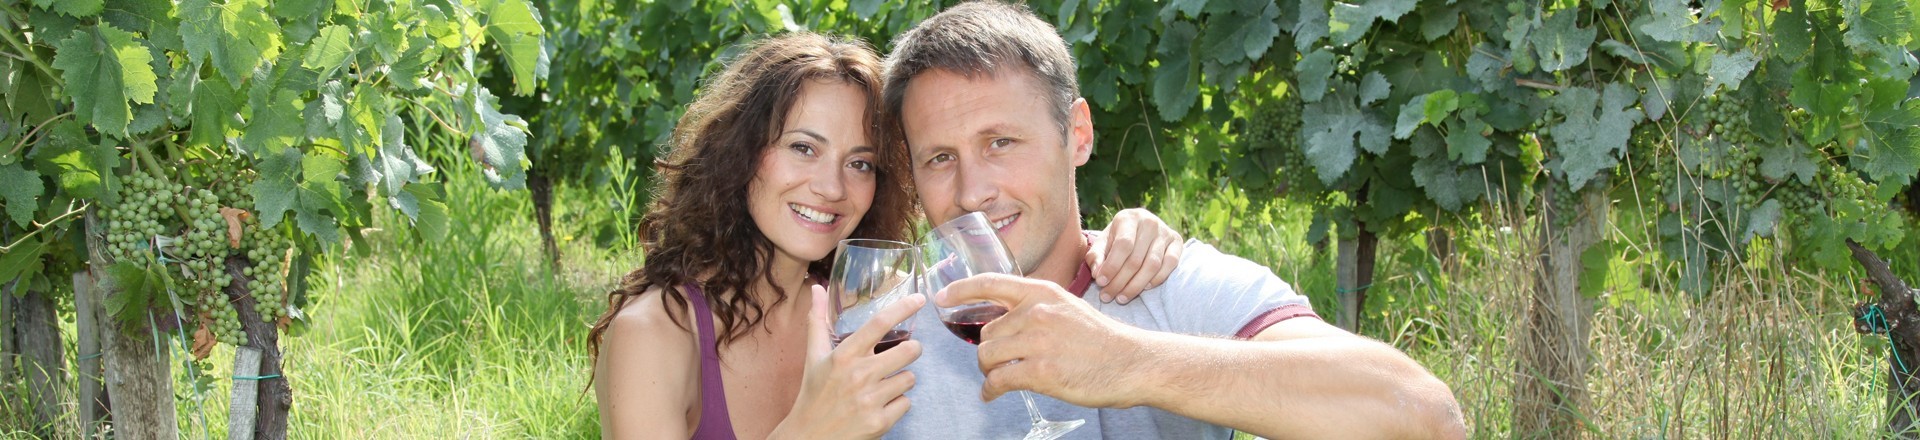 man and woman picnicking drinking wine